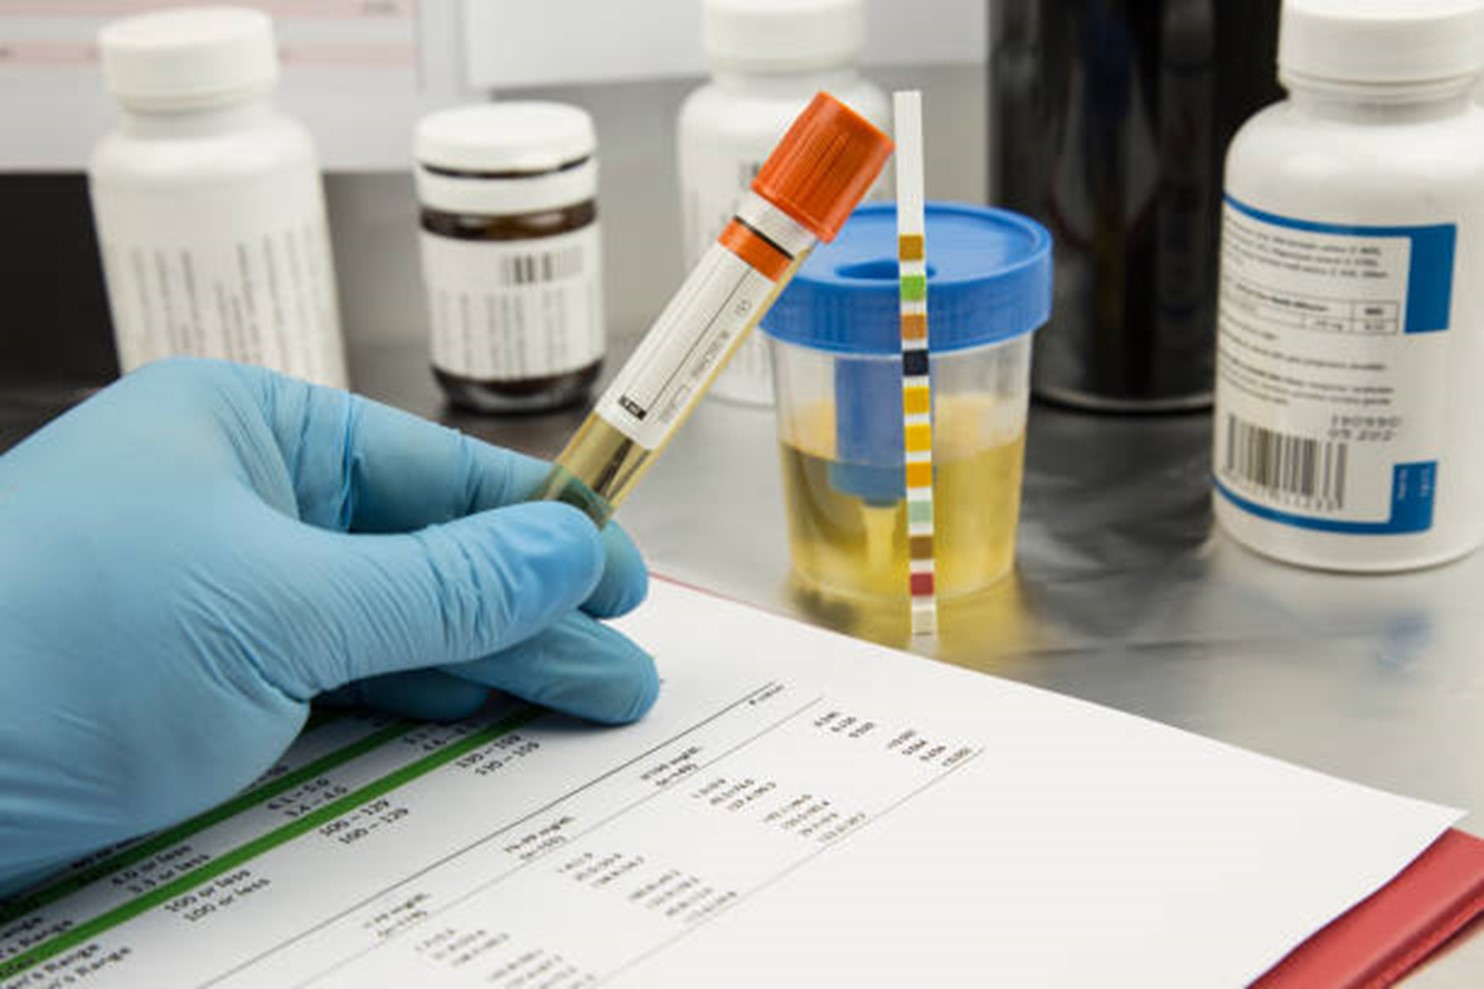 Role of Drug Testing Kits Products In Maintaining healthy Workplace Practices